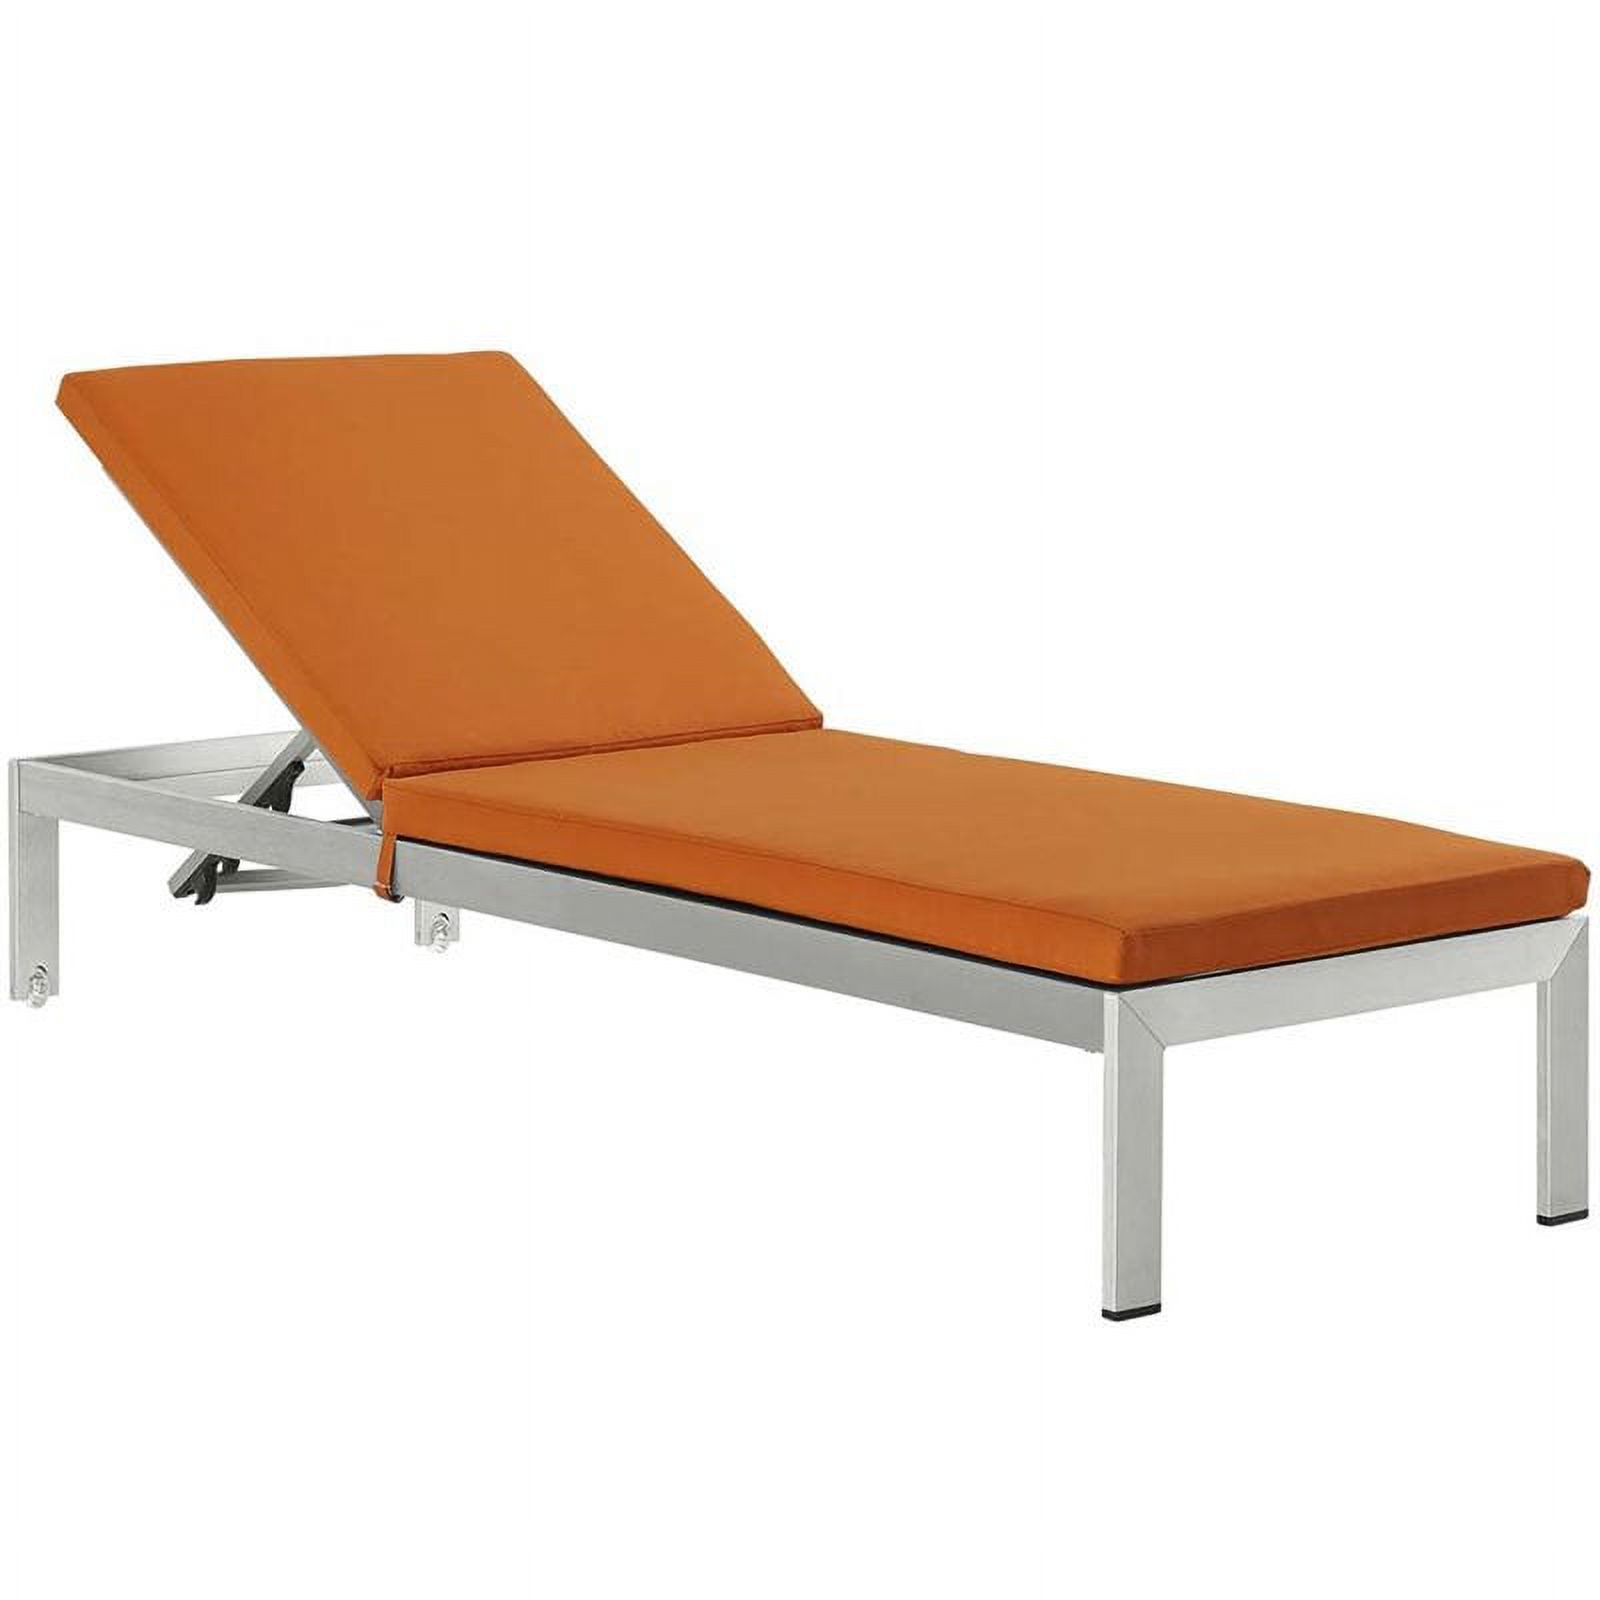 Pemberly Row Modern Fabric Patio Chaise Lounge in Orange (Set of 2) - image 3 of 6